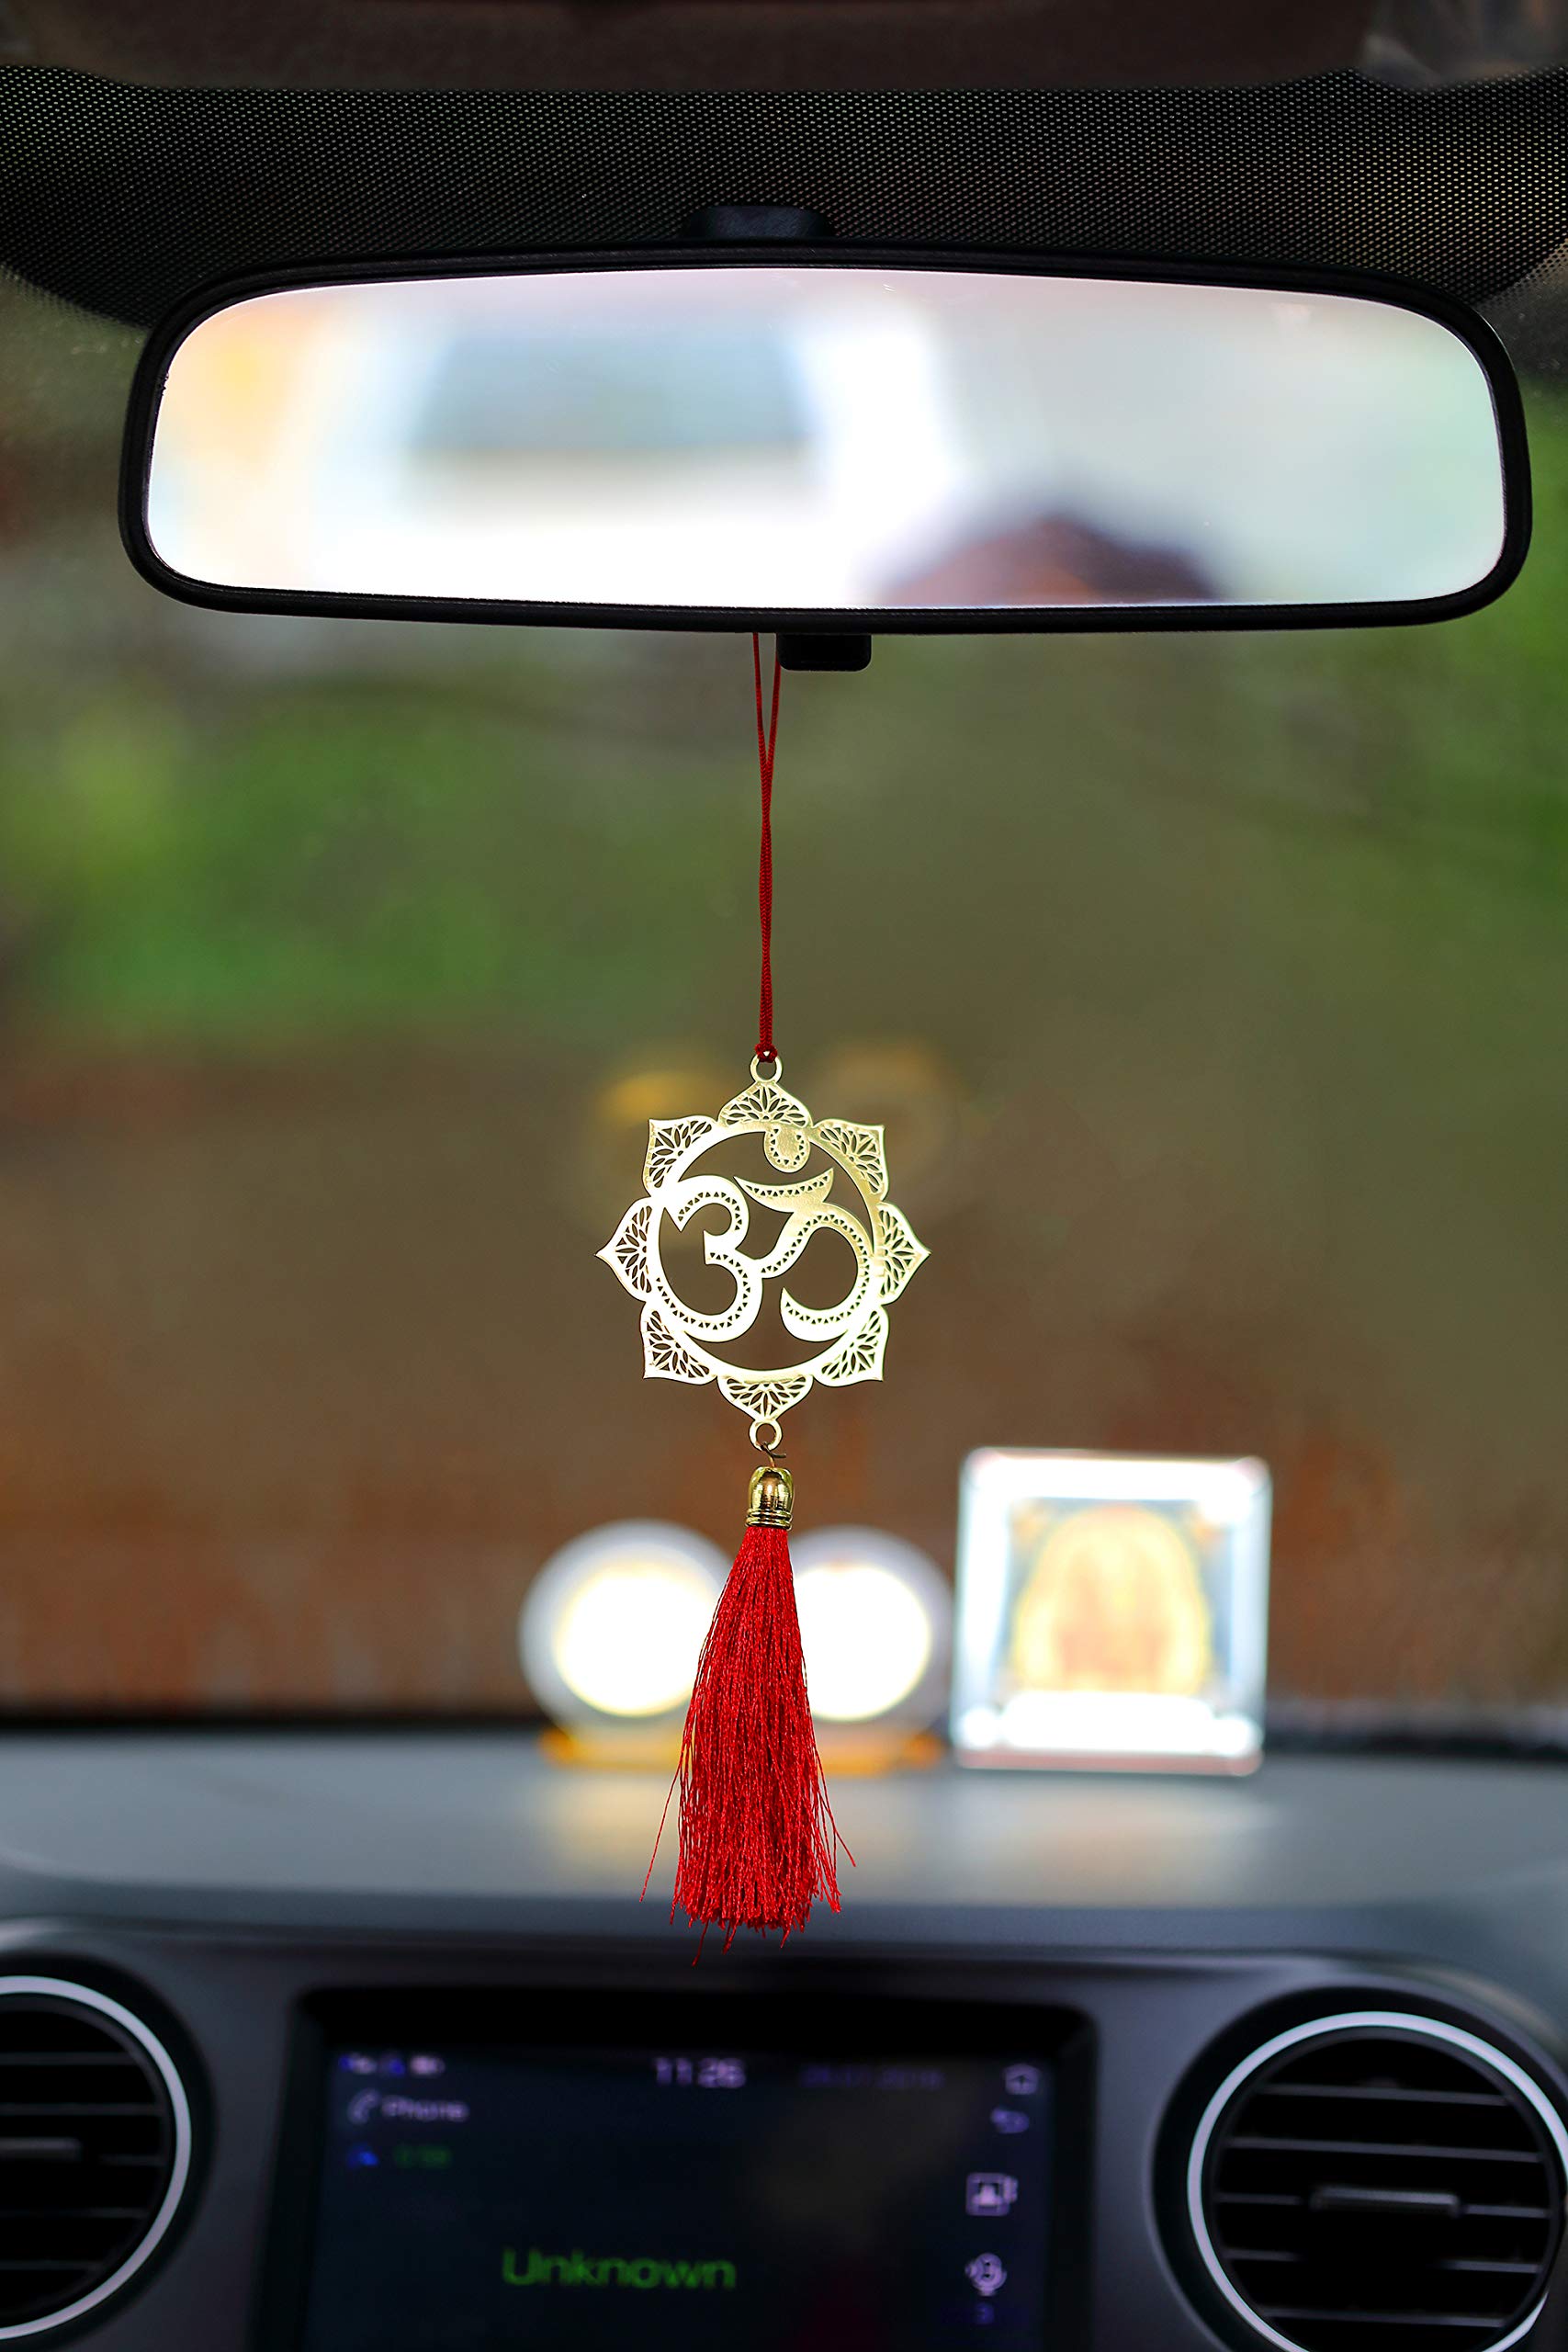 Pack of 2 Hindu Om Symbol Hanging Accessories for Car rear view mirror Decor in Brass - Floral